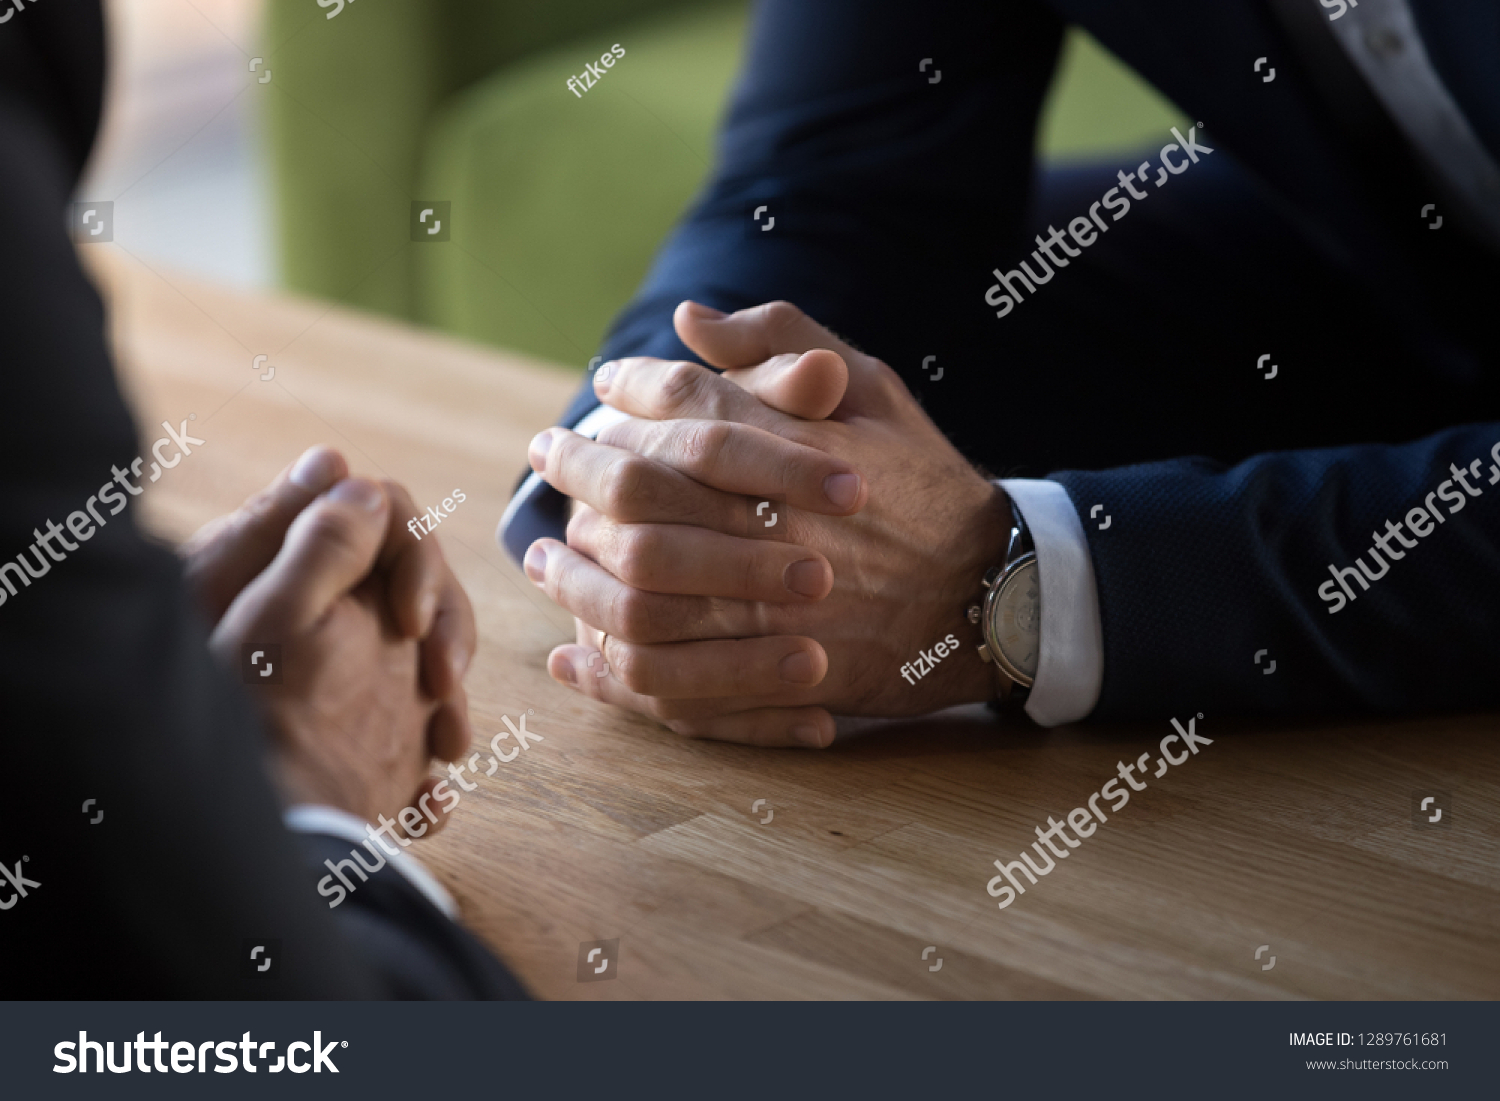 Clasped male hands of two businessmen negotiate at table, hr recruiter making hiring decision at difficult job interview, opponents dialogue debate, business confrontation challenge concept, close up #1289761681